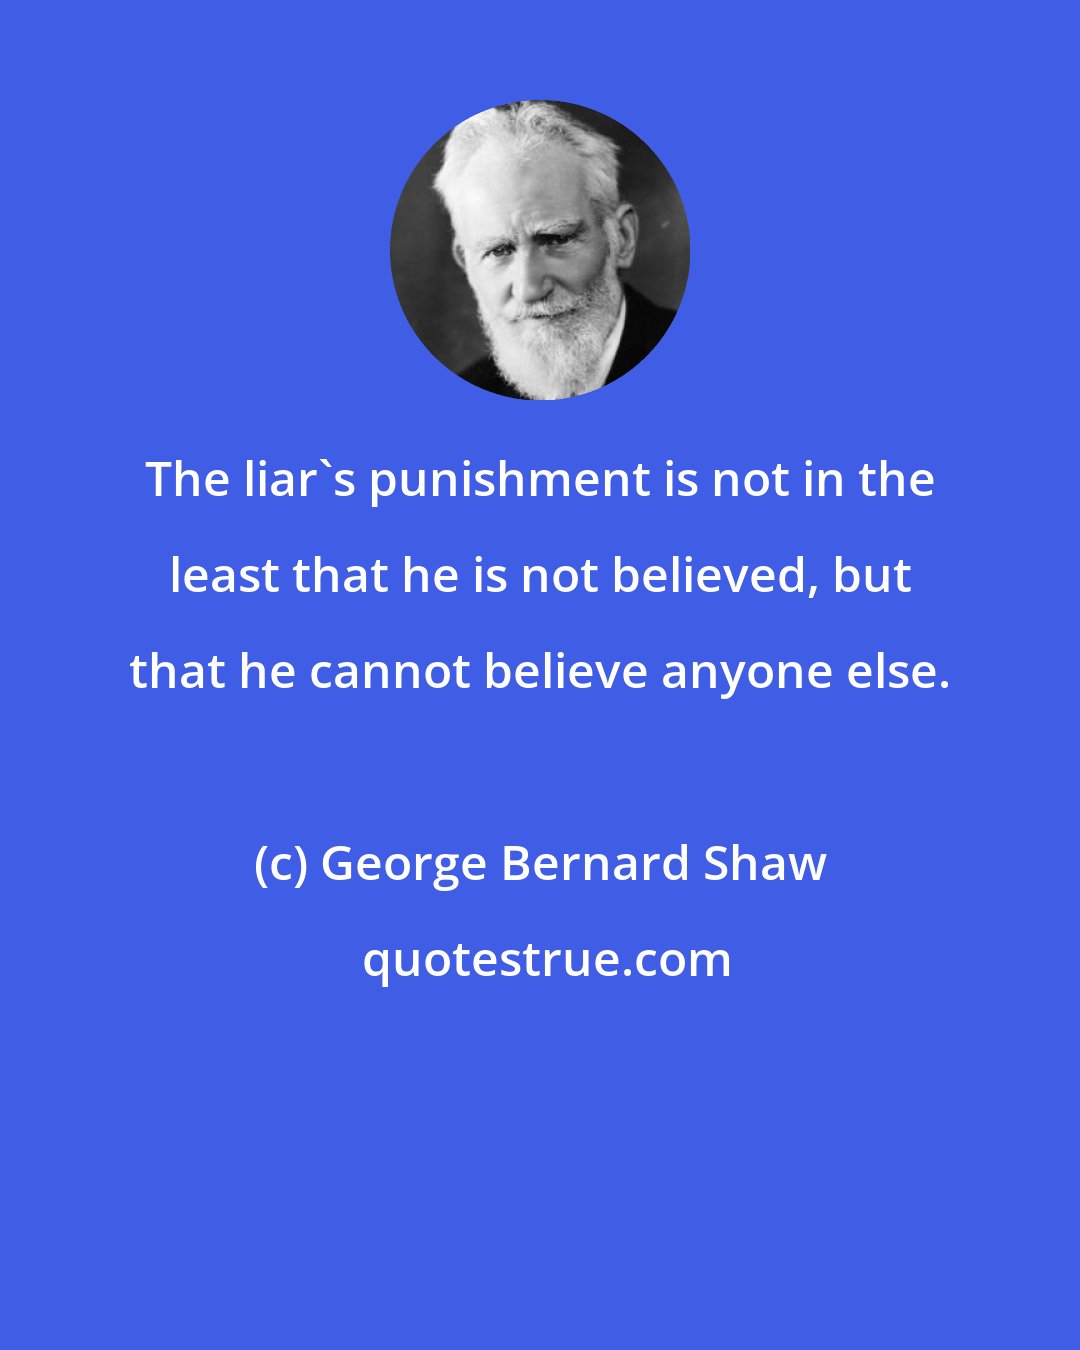 George Bernard Shaw: The liar's punishment is not in the least that he is not believed, but that he cannot believe anyone else.